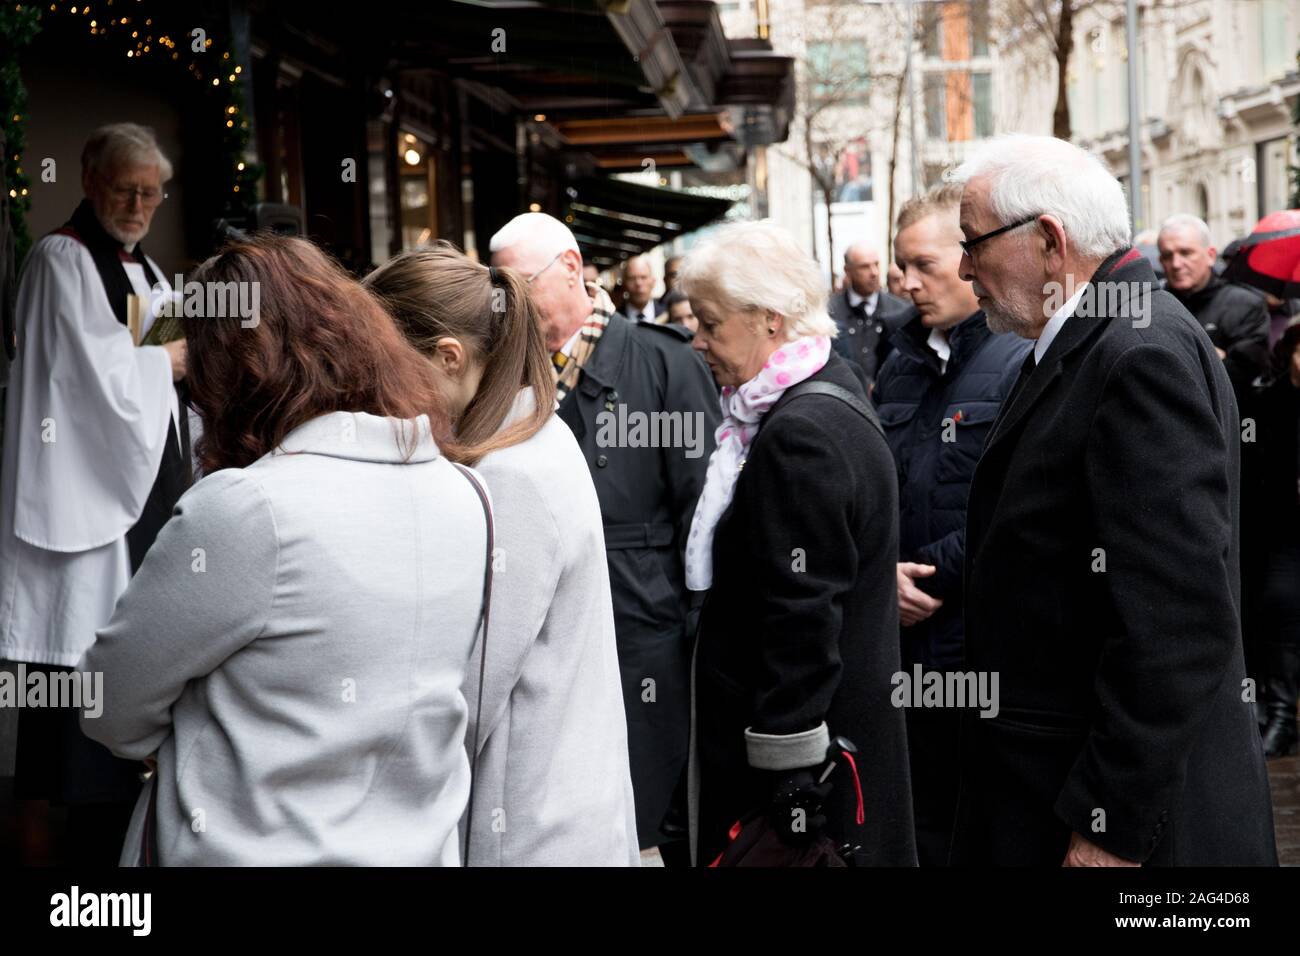 Harrods, Hans Crescent, London, UK. 17th December 2019. 1.20pm. Survivors, friends and families of the 1983 Harrods store bomb attack gather to commemorate the police and civilians killed or injured when the IRA placed a car bomb outside this iconic London store on the last Saturday before Christmas. Stock Photo